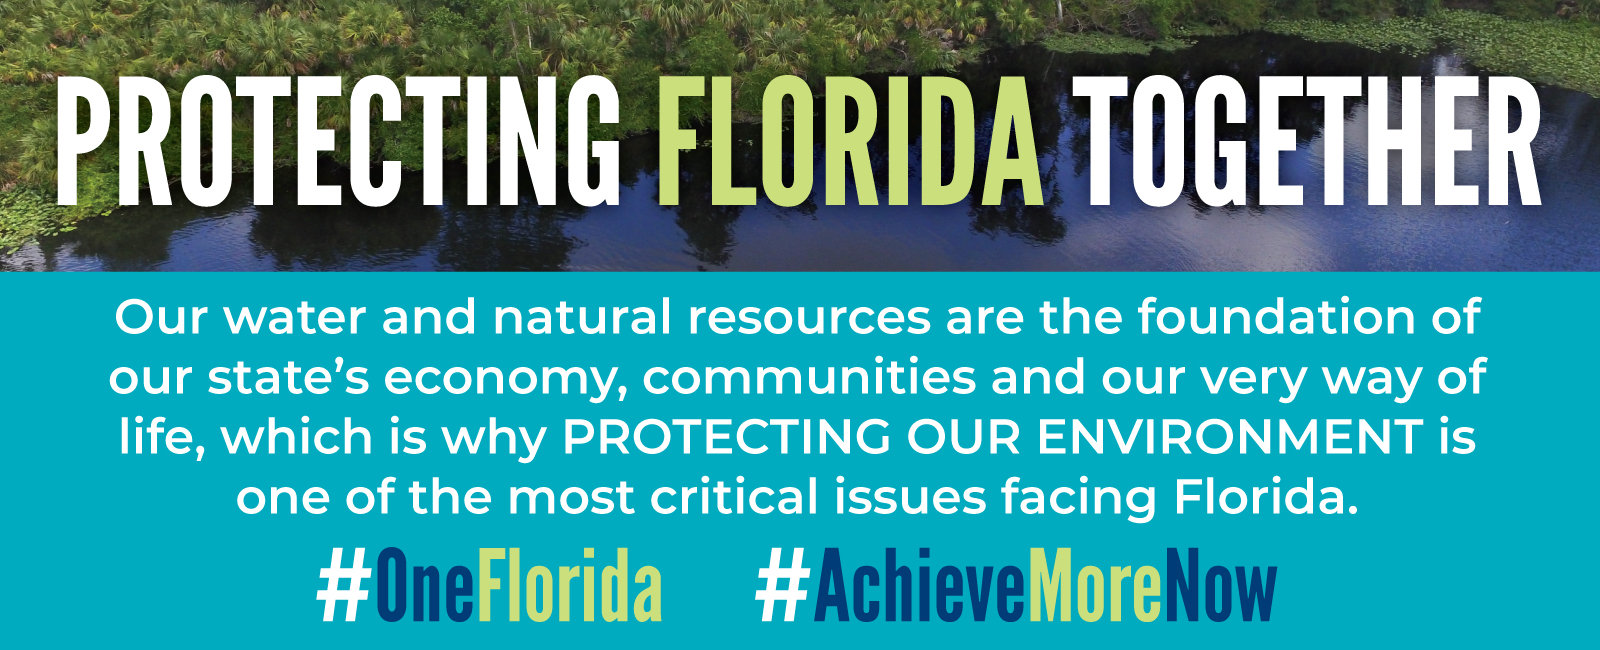 Our water and natural resources are the foundation of  our state’s economy, communities and our very way of life, which is why protecting our environment is  one of the most critical issues facing Florida.